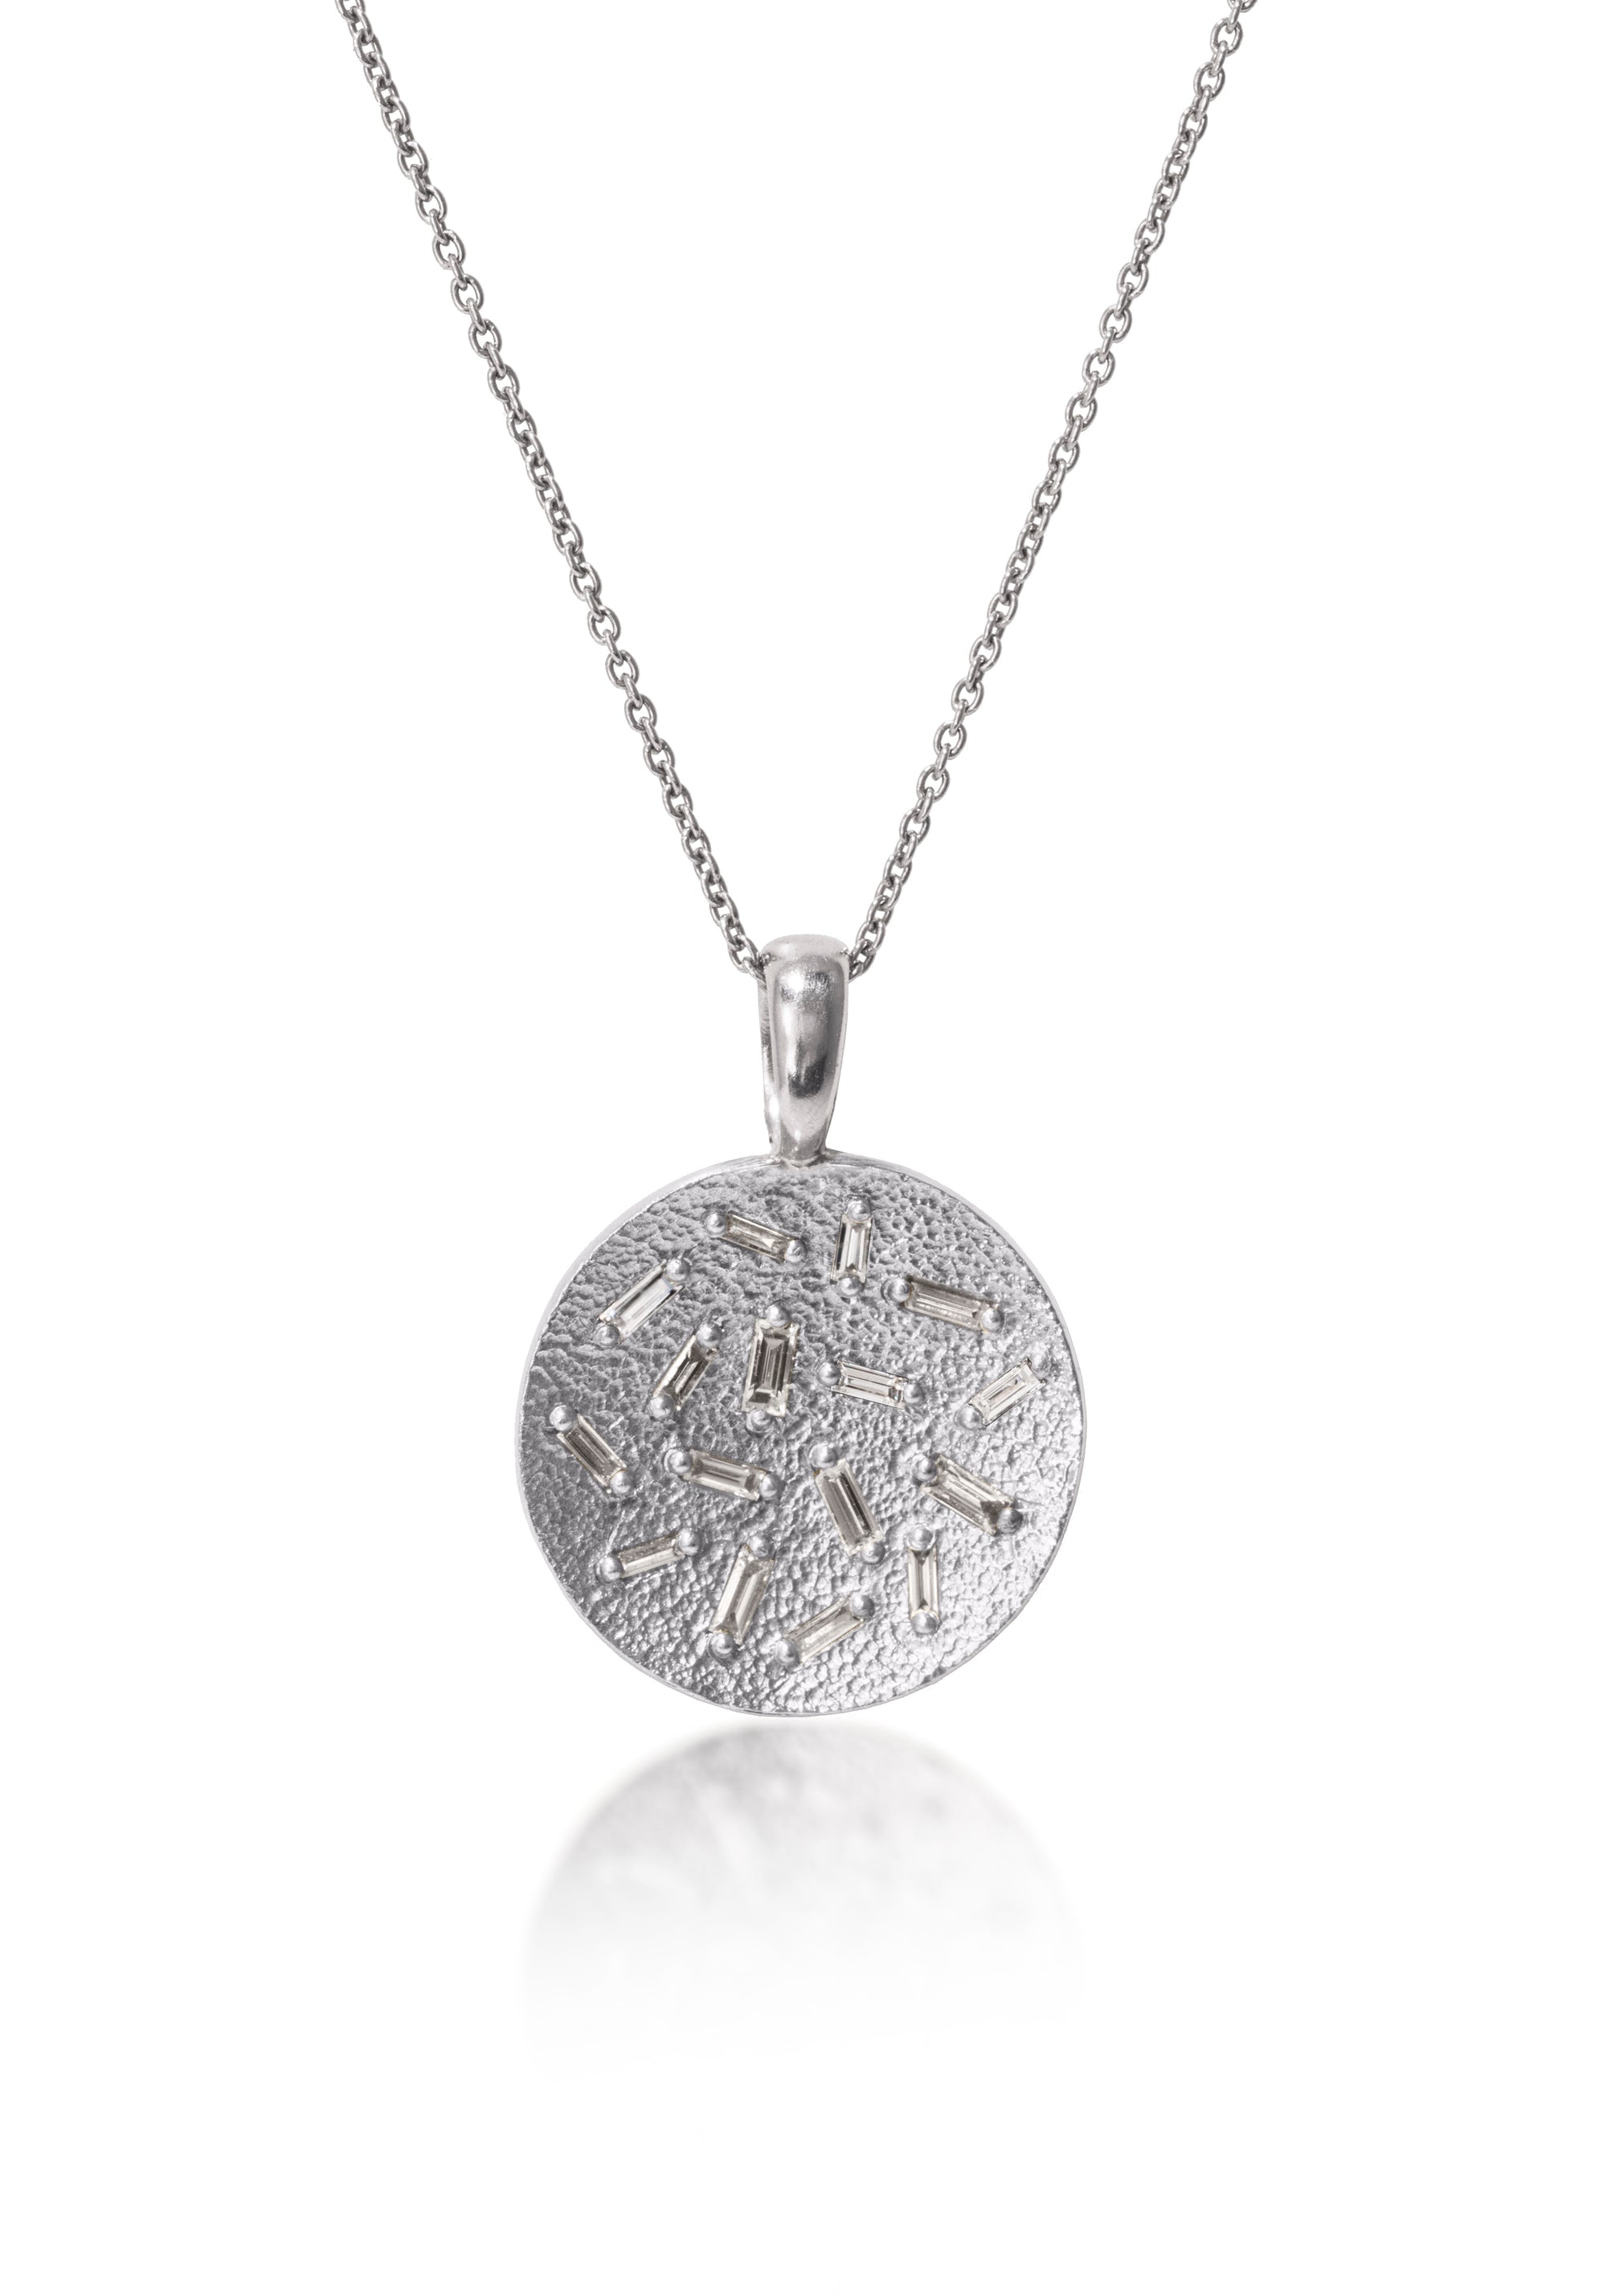 This radiant, medium size circular pendant is set with 16 white diamond baguettes. Richly textured to shimmer in the light, this piece is available in three color ways, oxidized silver, 18k gold and palladium.  0.435 tcw.